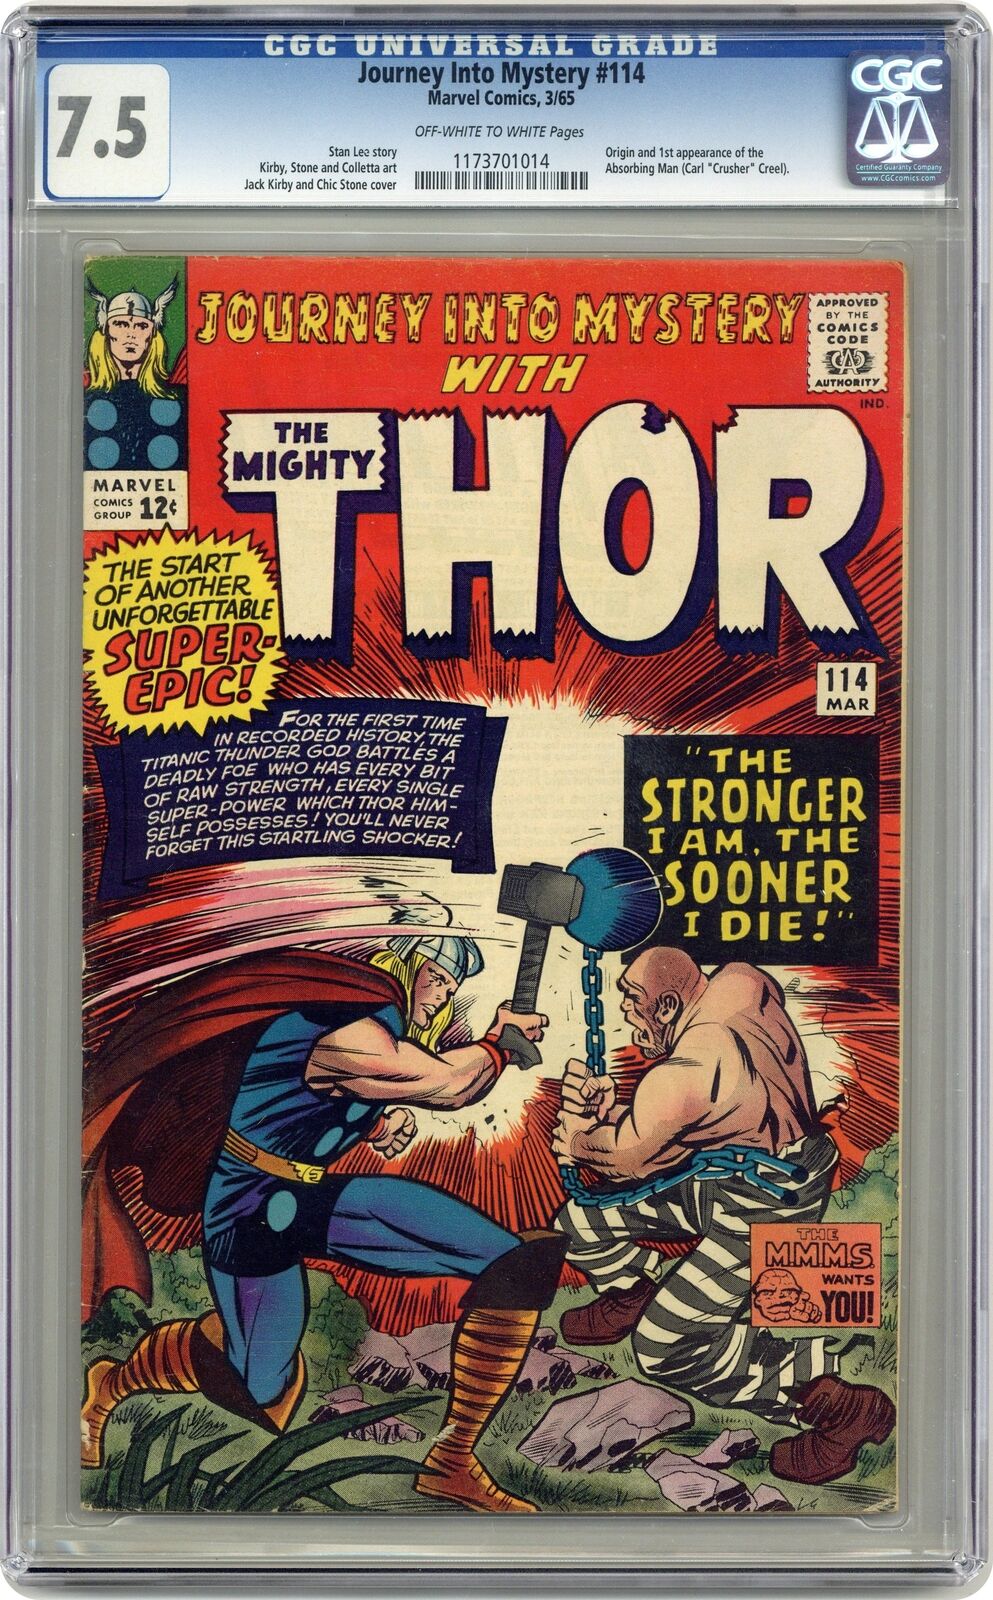 Thor Journey Into Mystery #114 CGC 7.5 1965 1173701014 1st app. Absorbing Man